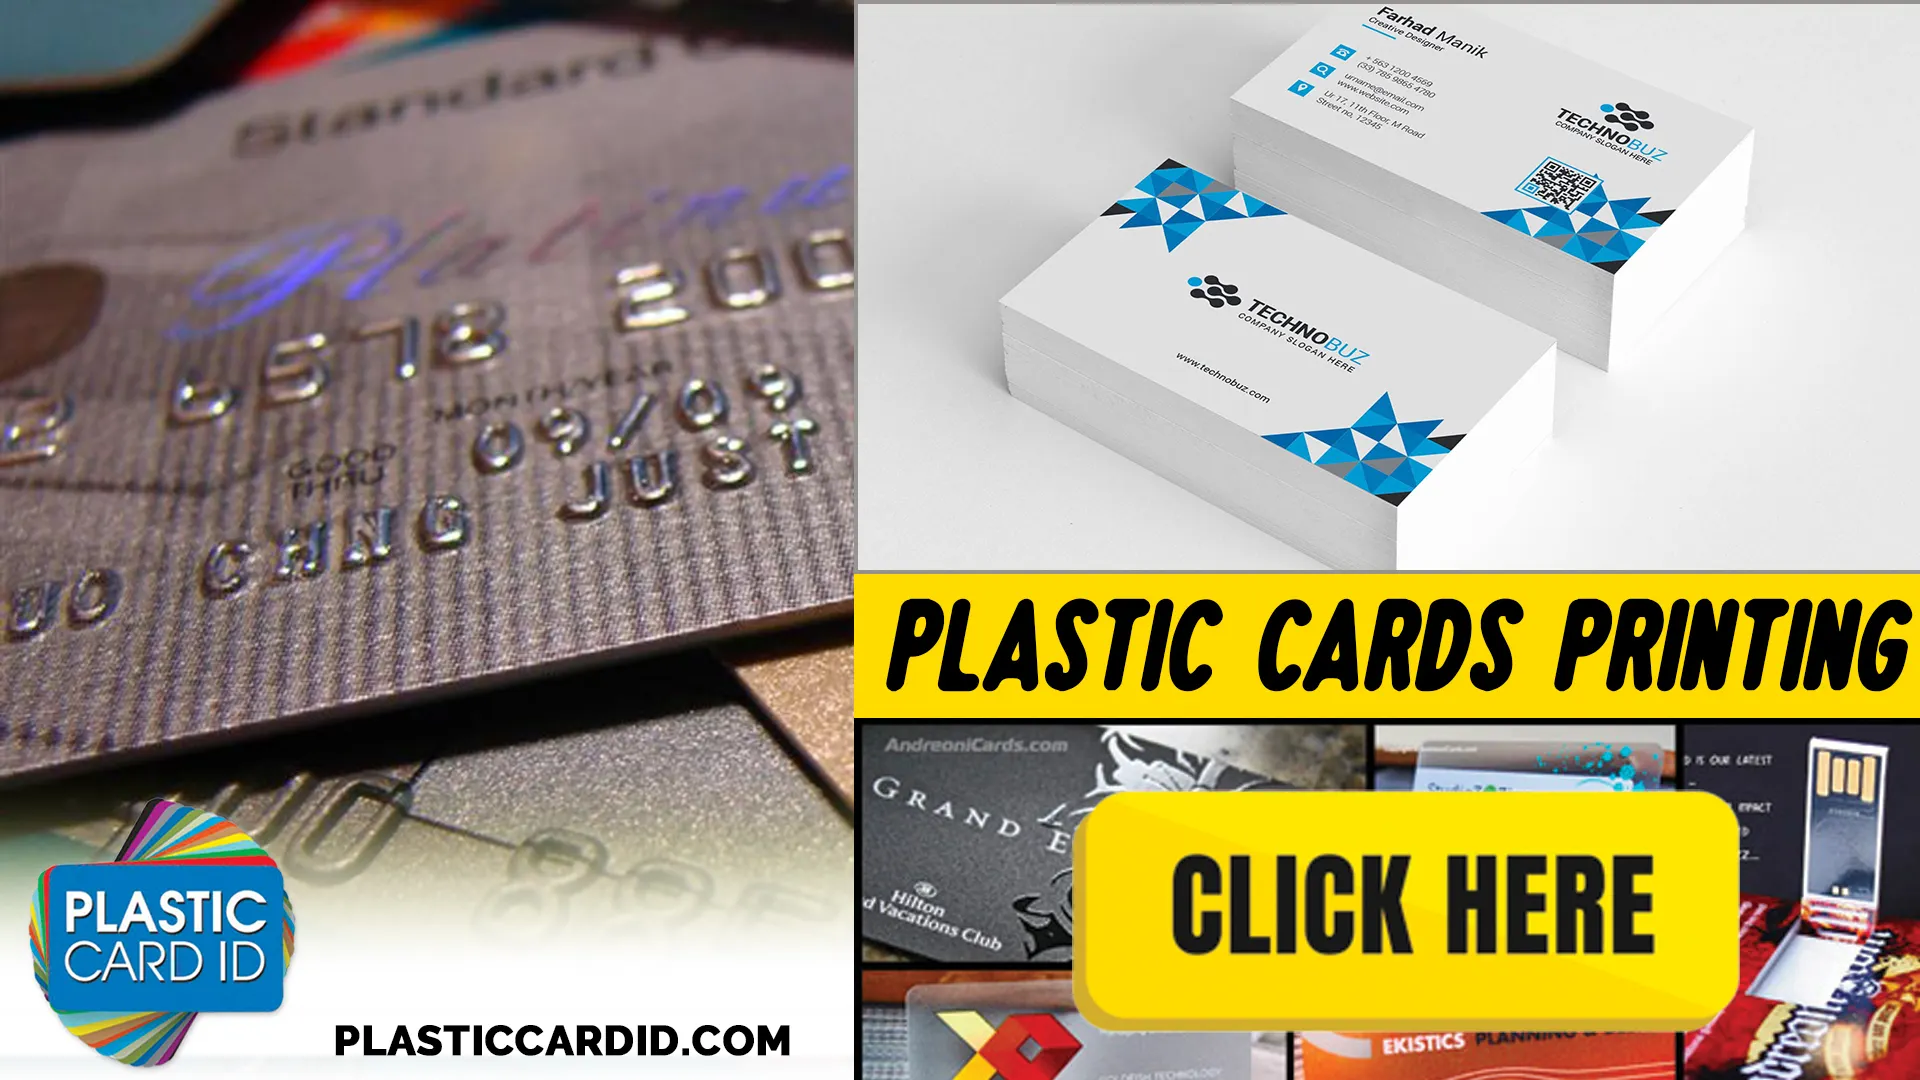 Plastic Cards Today: More Than Just A Piece of Plastic